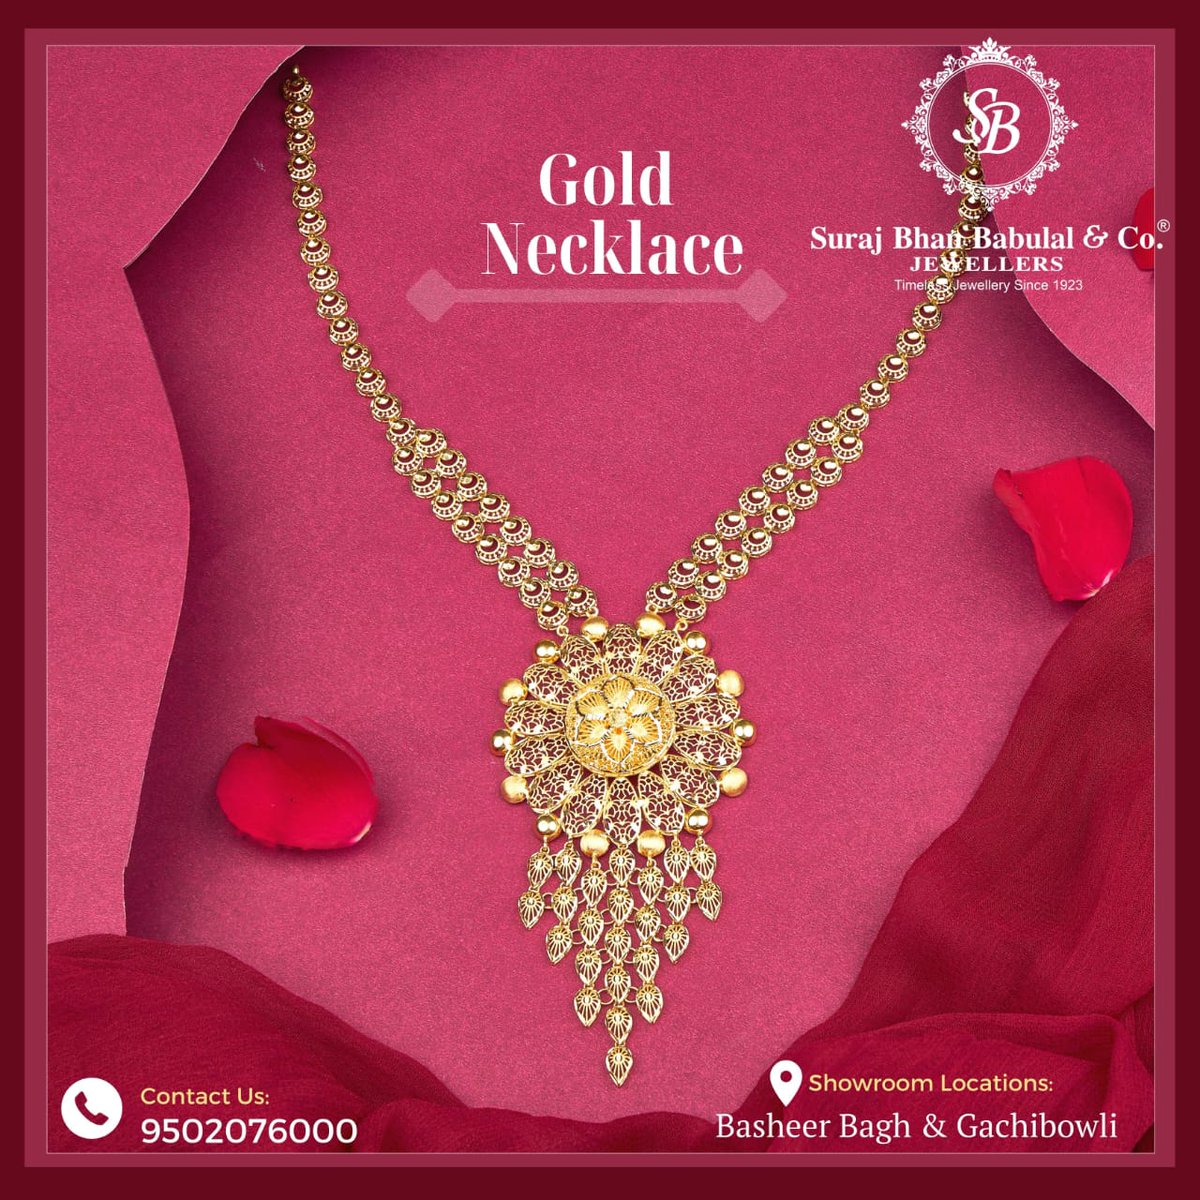 Embodying the essence of luxury with this exquisite gold necklace. 💎✨
For inquiries please contact-9502076000.
#goldnecklace #JewelryLove #LuxuryJewelry  #TimelessPiece #FineJewelry #StatementPiece #HighEndJewelry #classicbeauty #surajbhangachibowli #surajbhanjewelleryhub